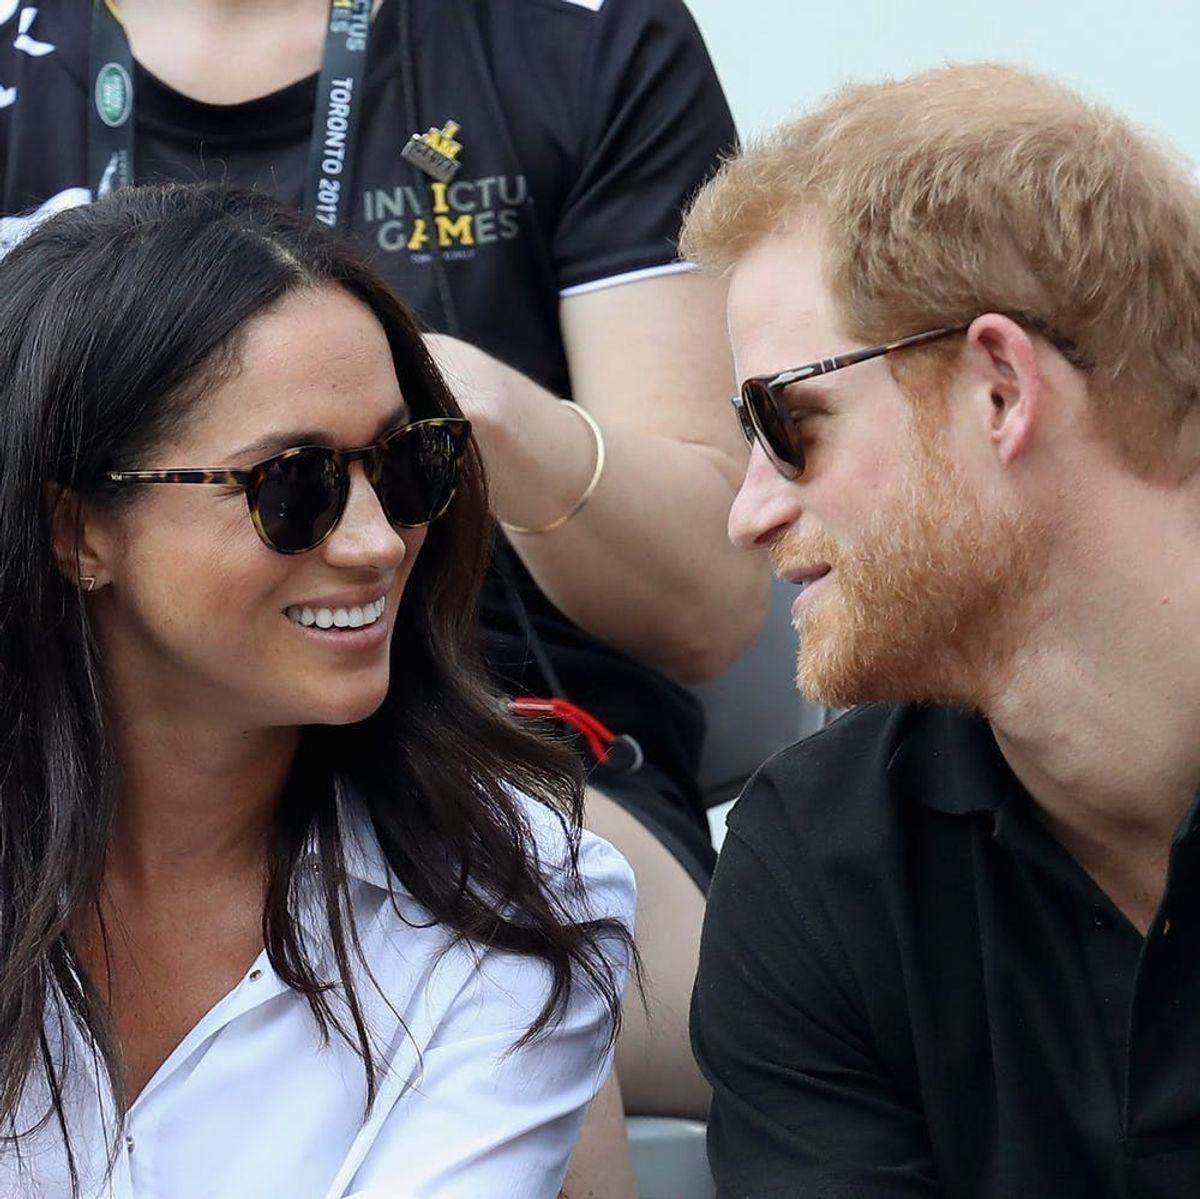 Prince Harry *Kissed* Meghan Markle in Public at the Invictus Games Closing Ceremony